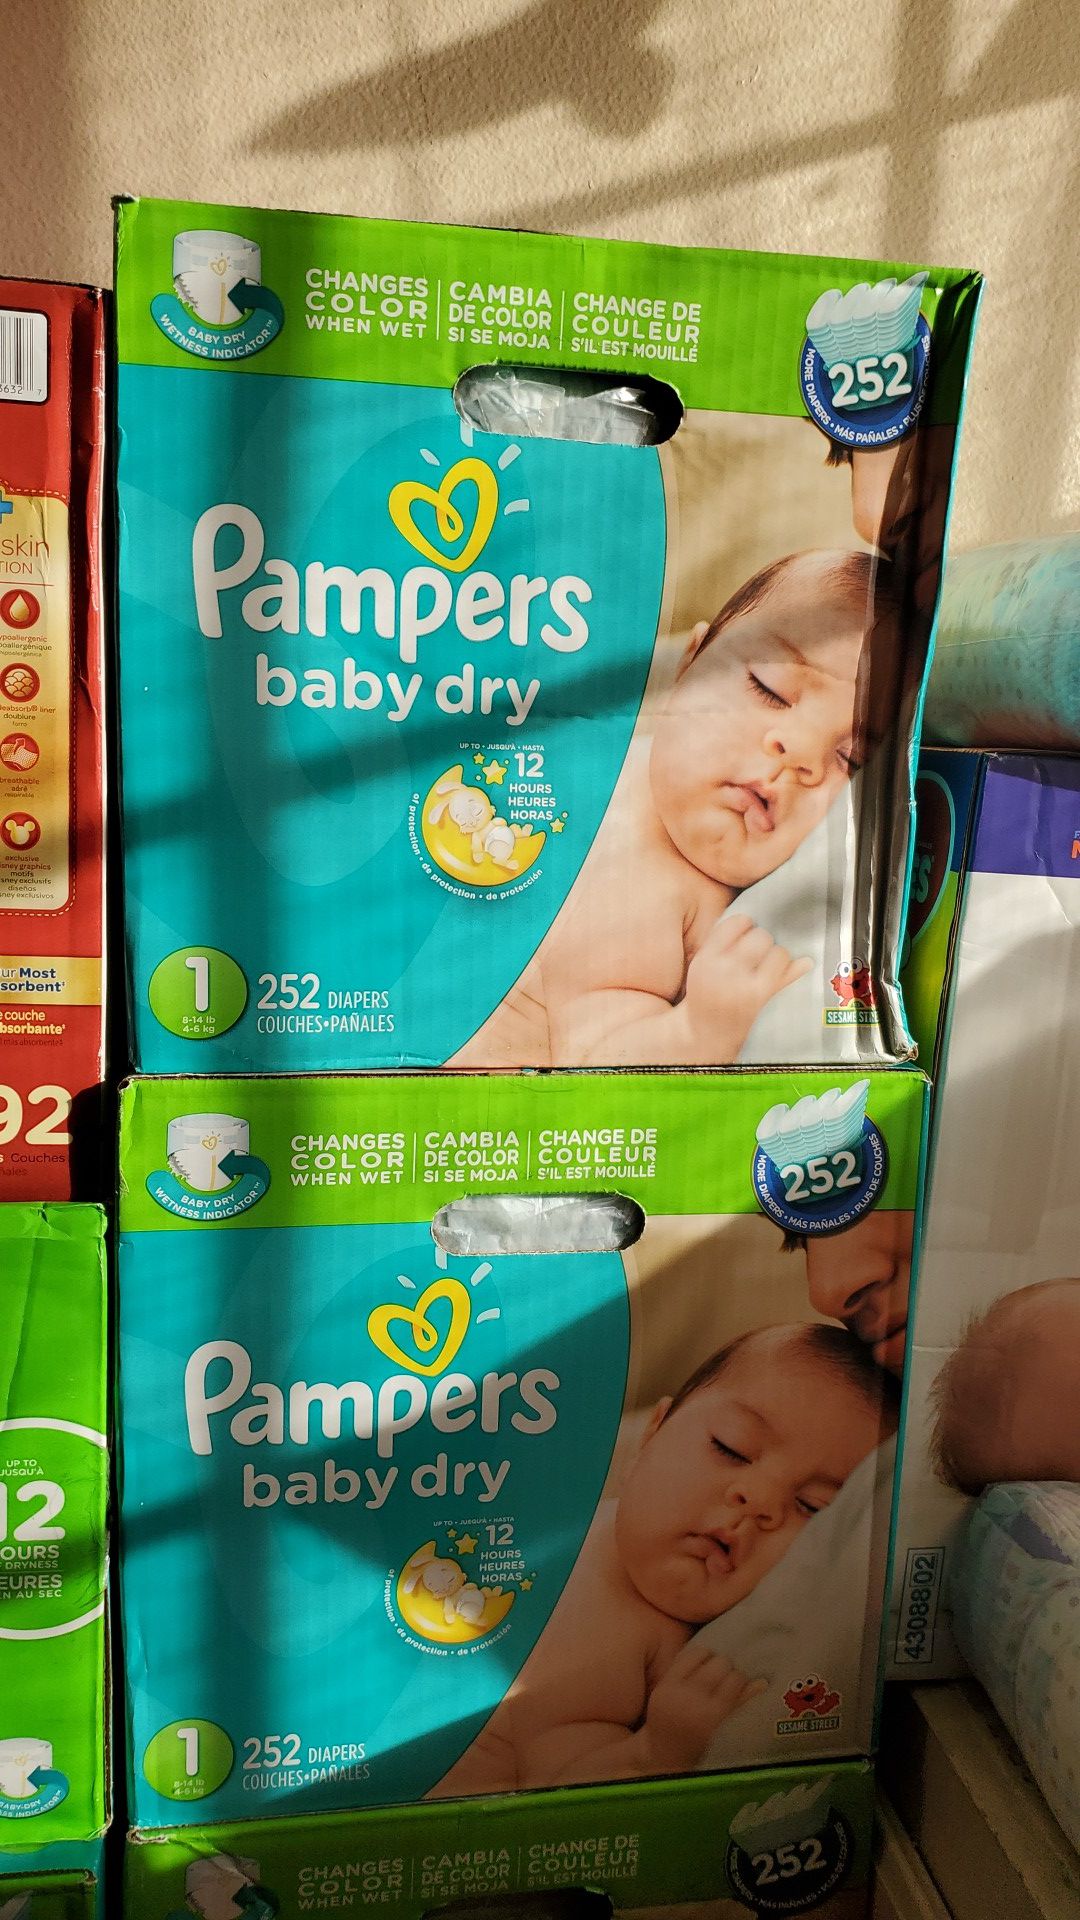 Pampers baby dry $35 price is Firm